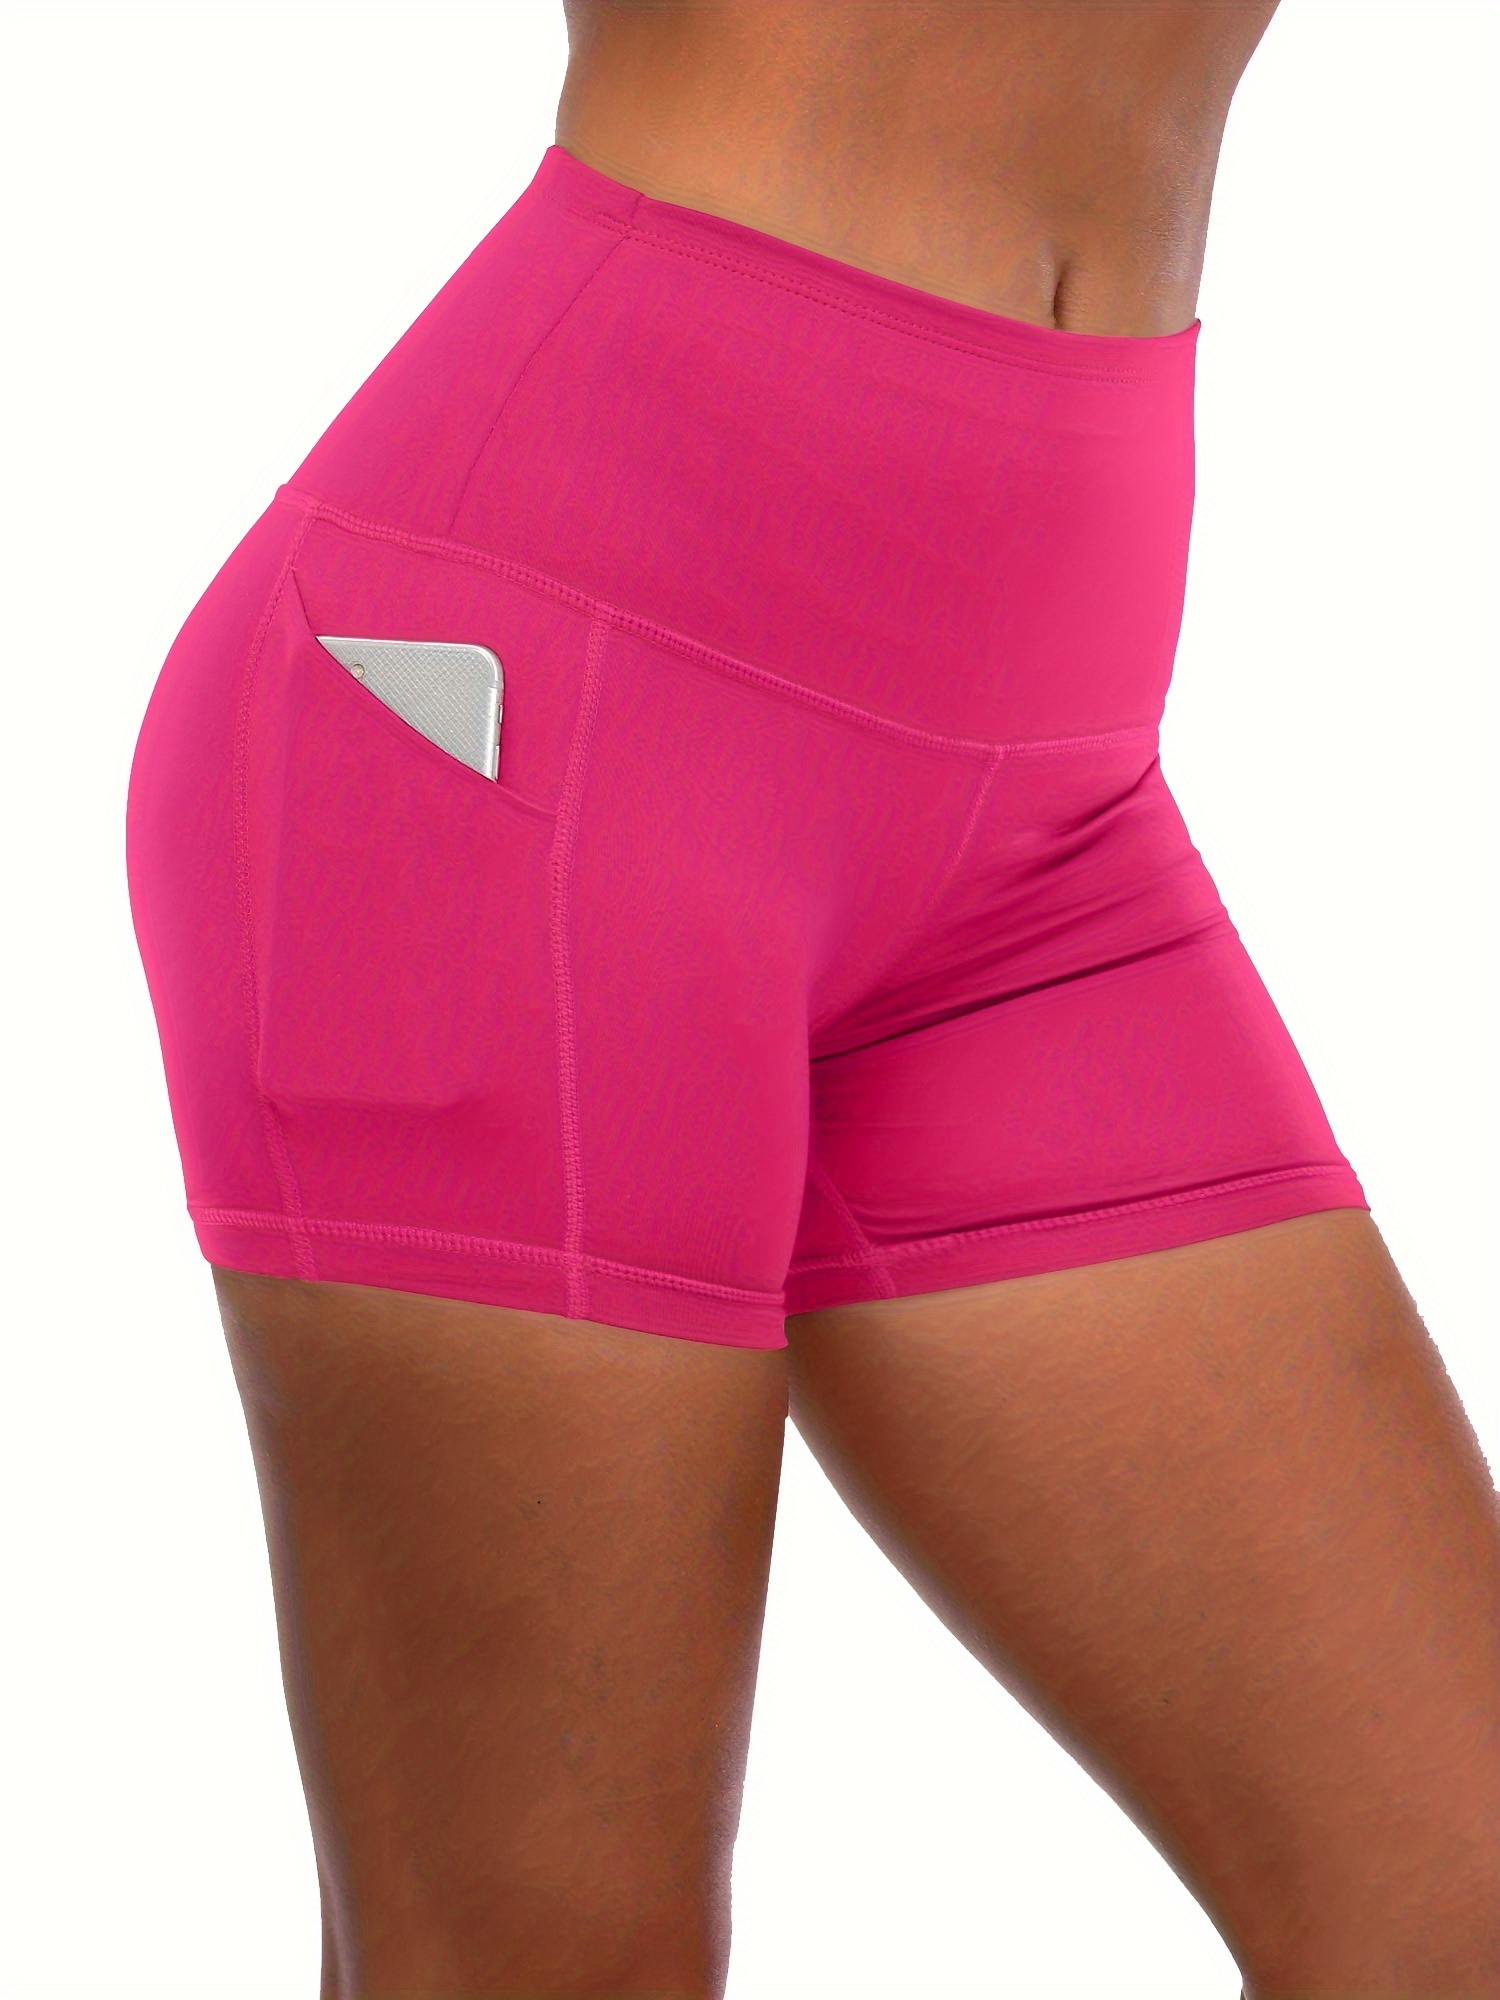 Buy Shorts or Half Lower for Women and Girls for Gym, Yoga, Running,  Cycling (XS, Pink) at